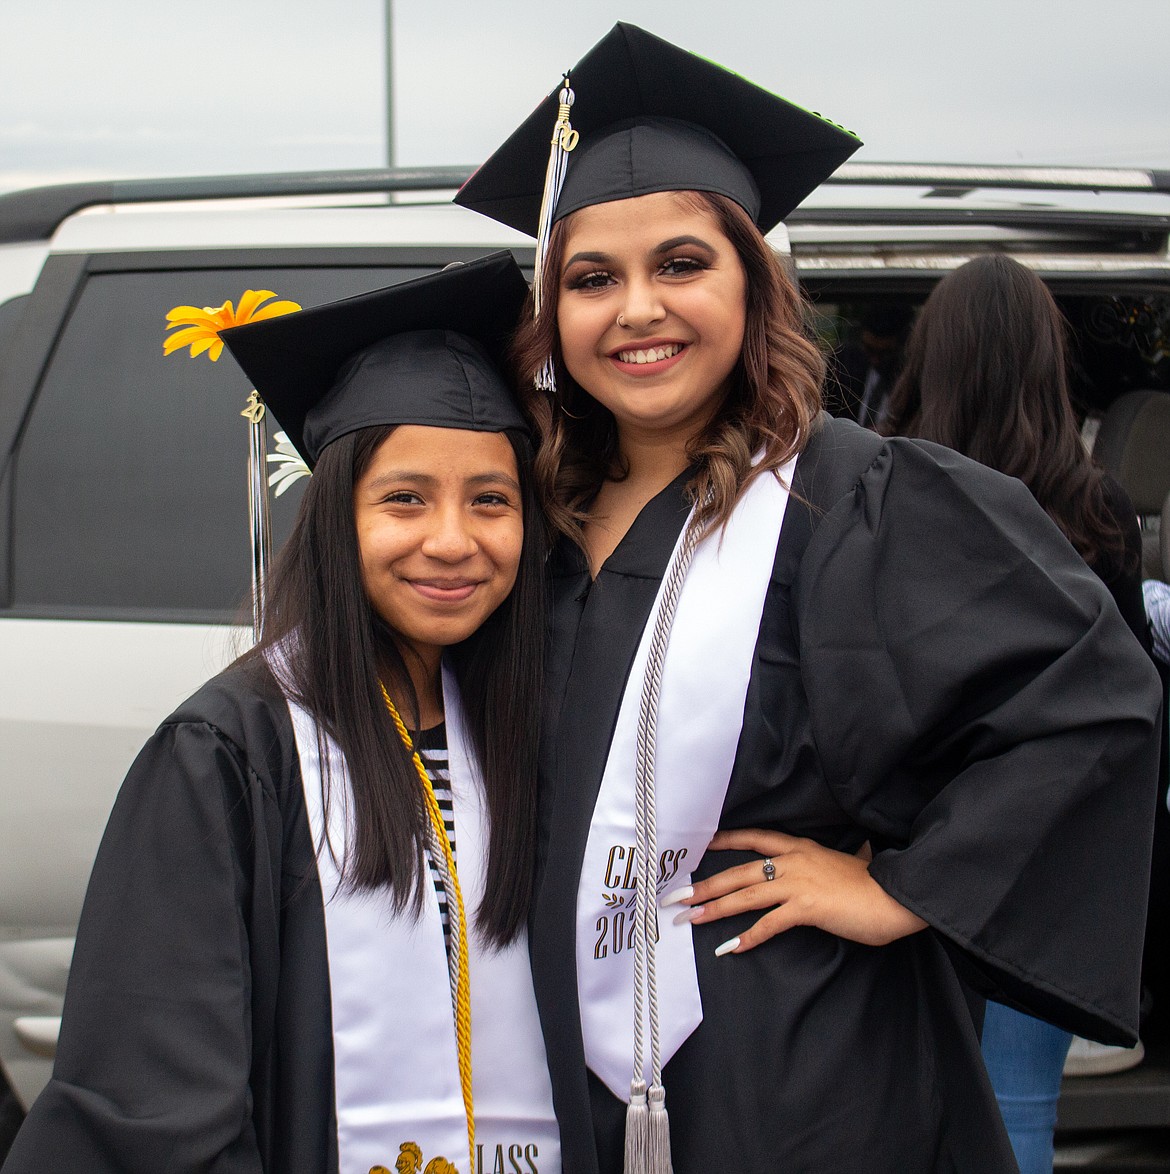 Royal High School graduates smile together in the parking lot before the graduation parade begins on Friday night.